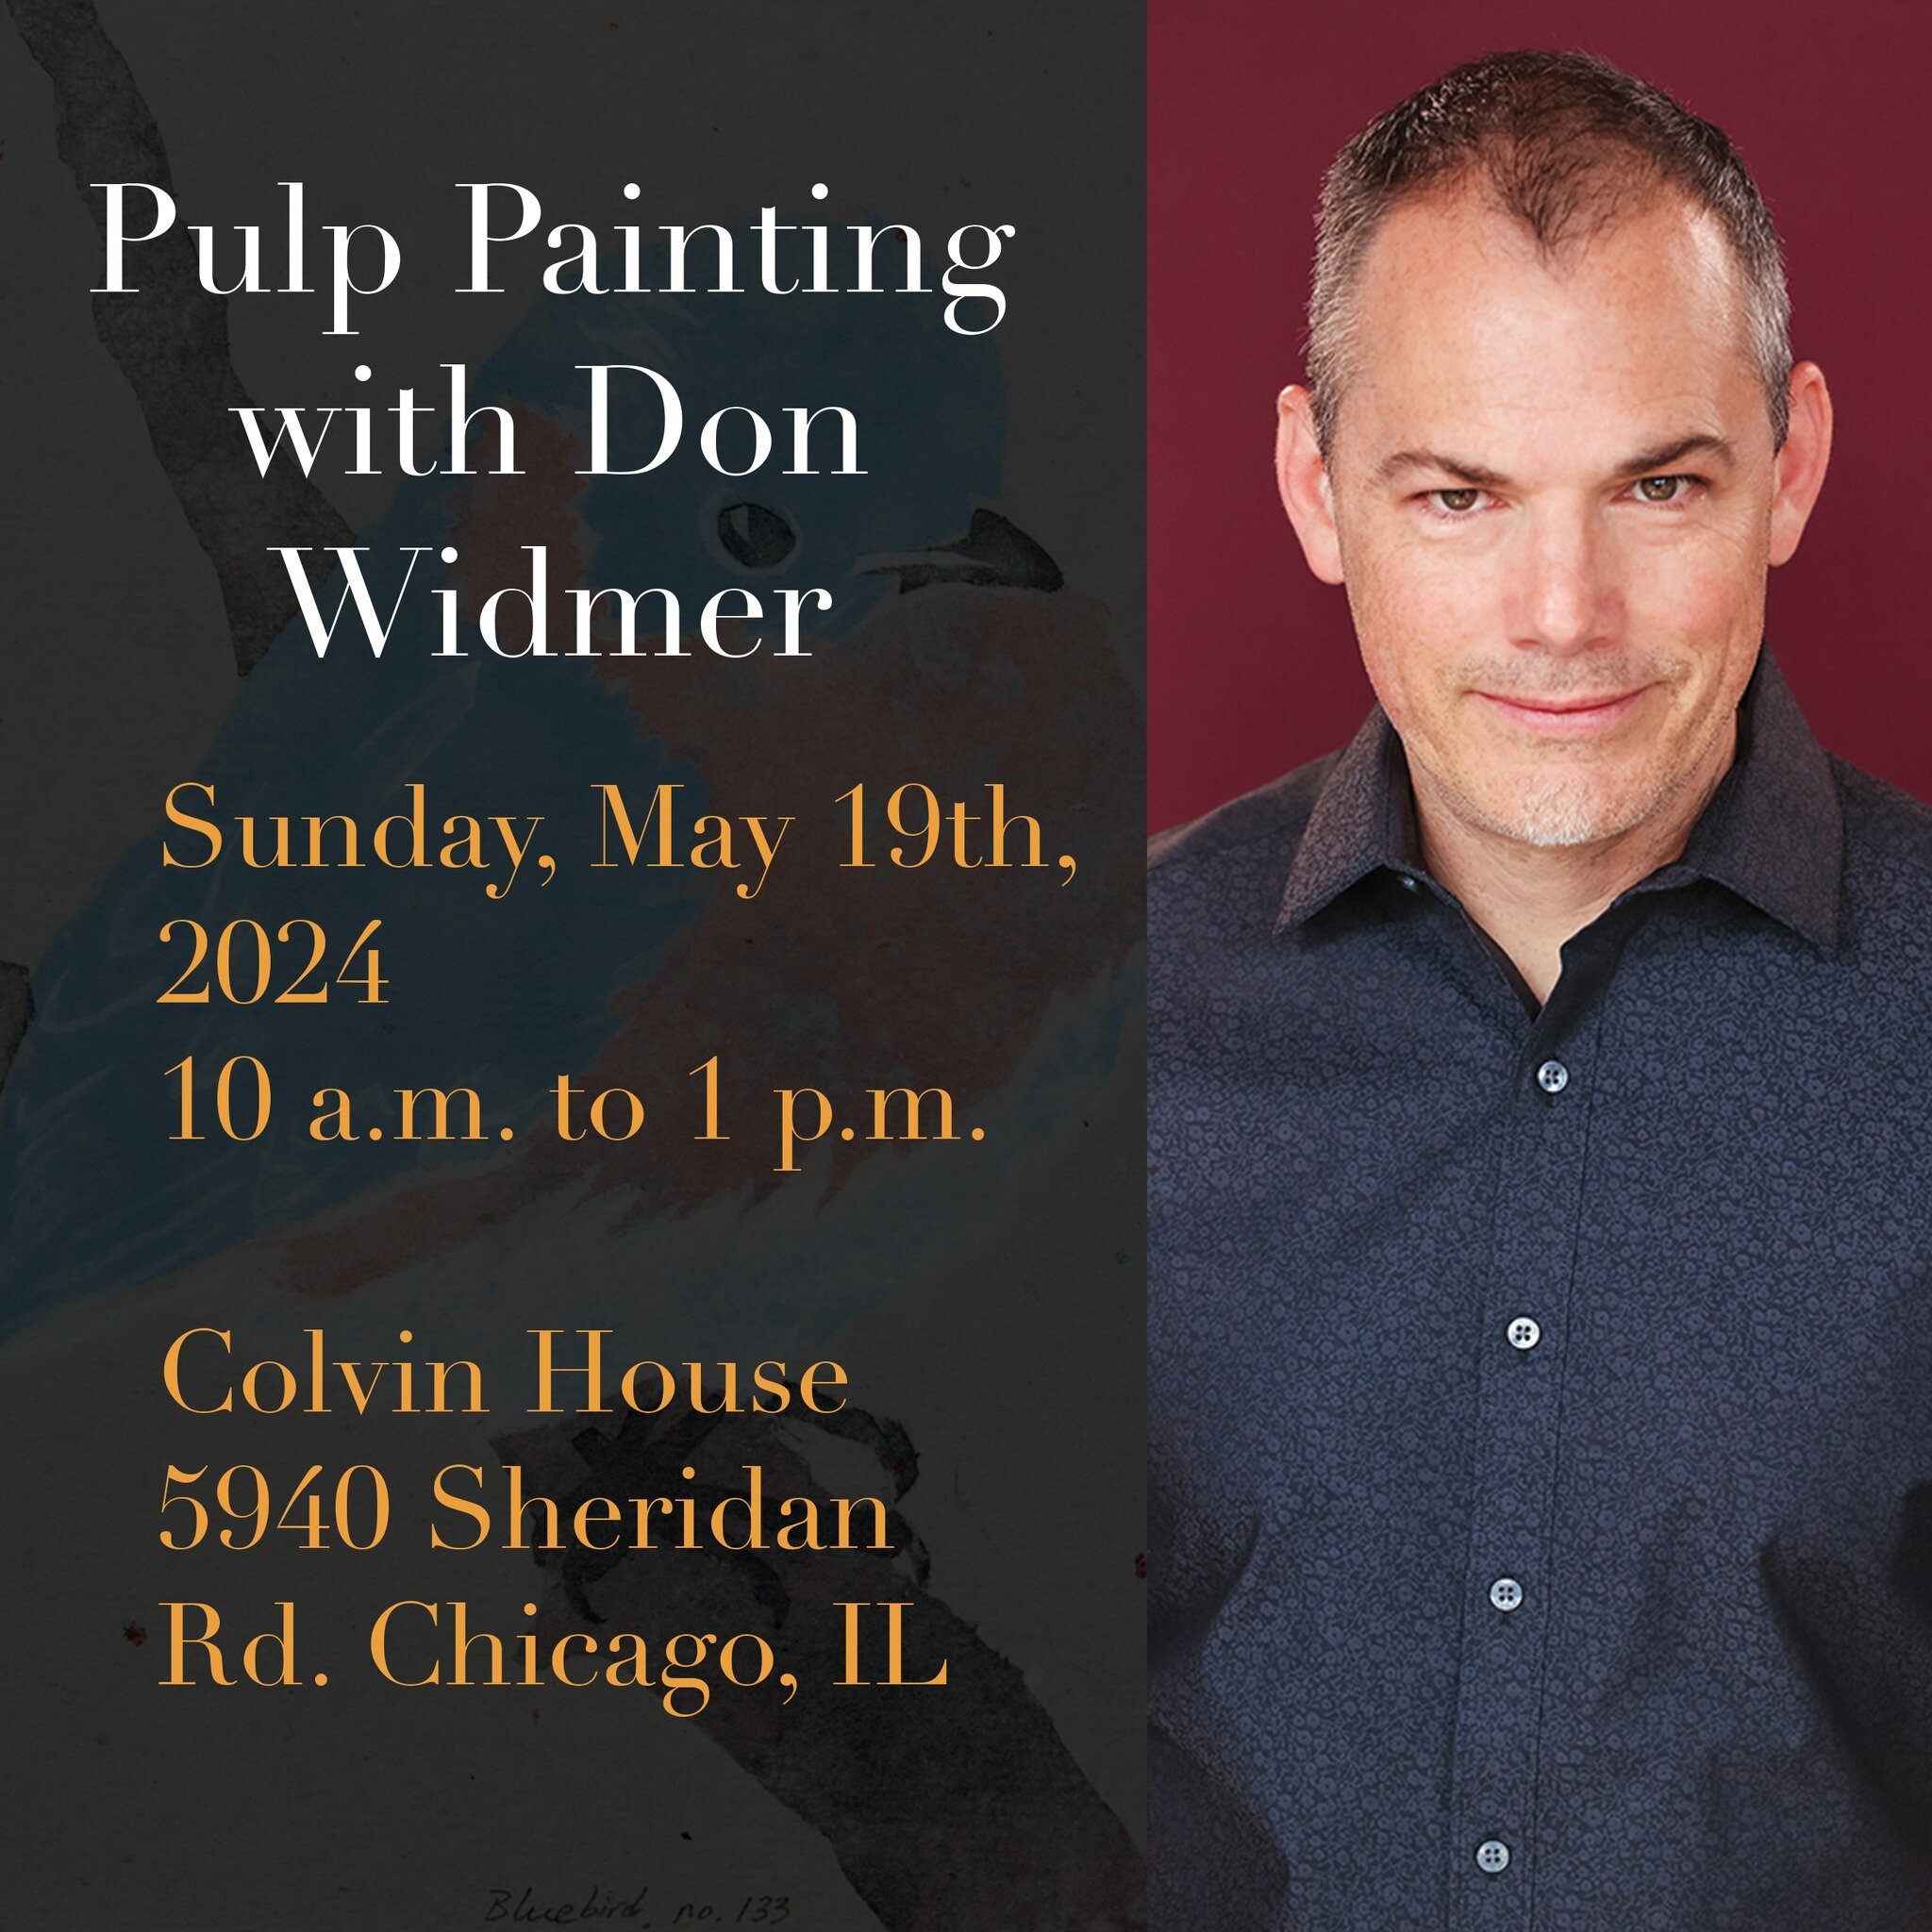 Ready to get wet? 

Join us on May 19th in the Colvin House courtyard for a pulp painting workshop with Don Widmer! Pulp painting is a technique that combines technical papermaking with your own creative imagery. Participants will learn the basics of